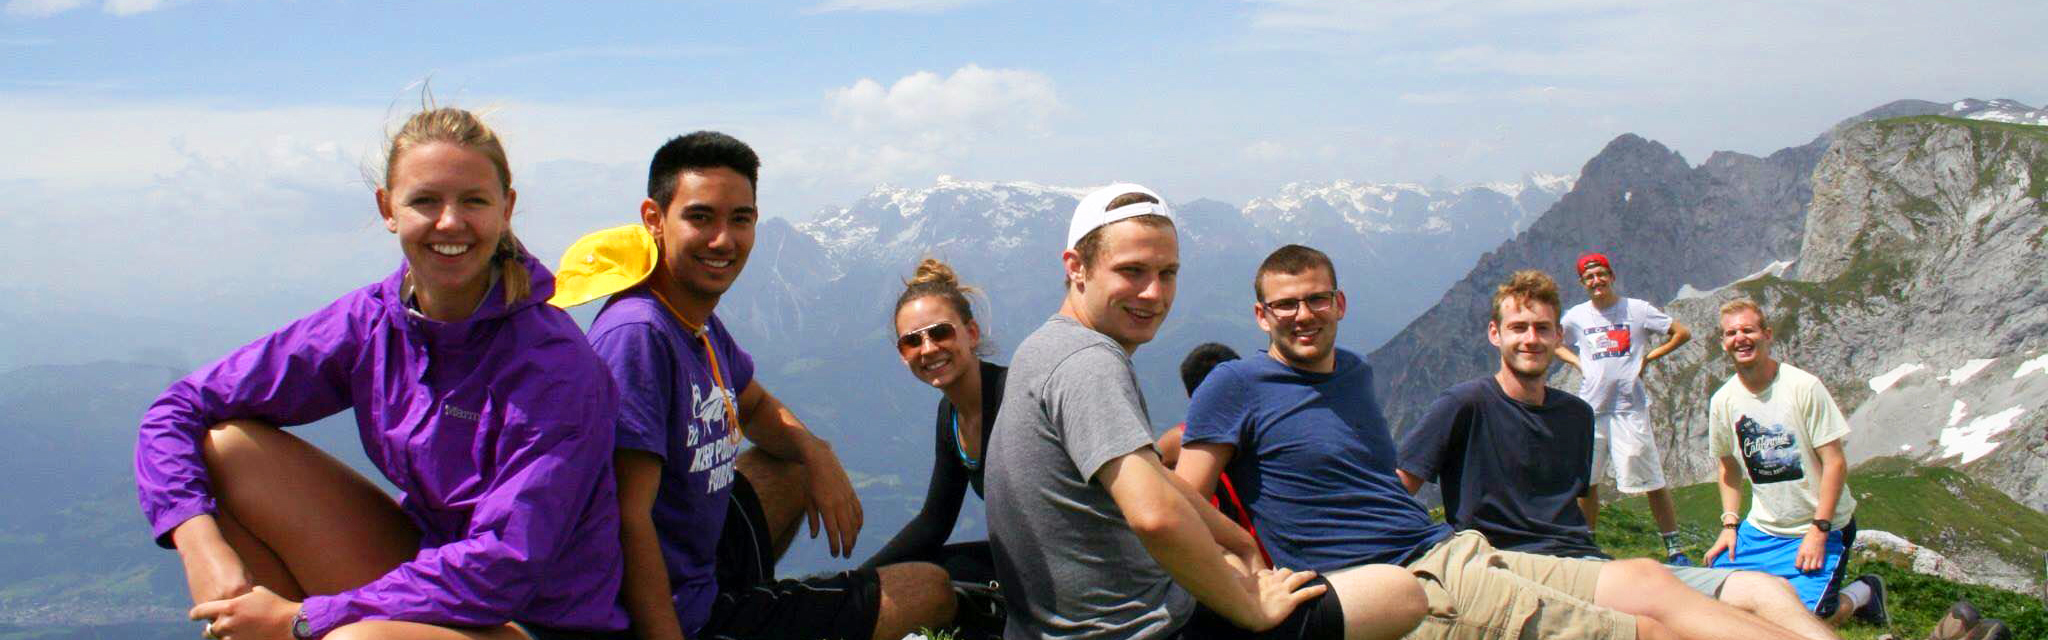 University of Portland students in the Alps